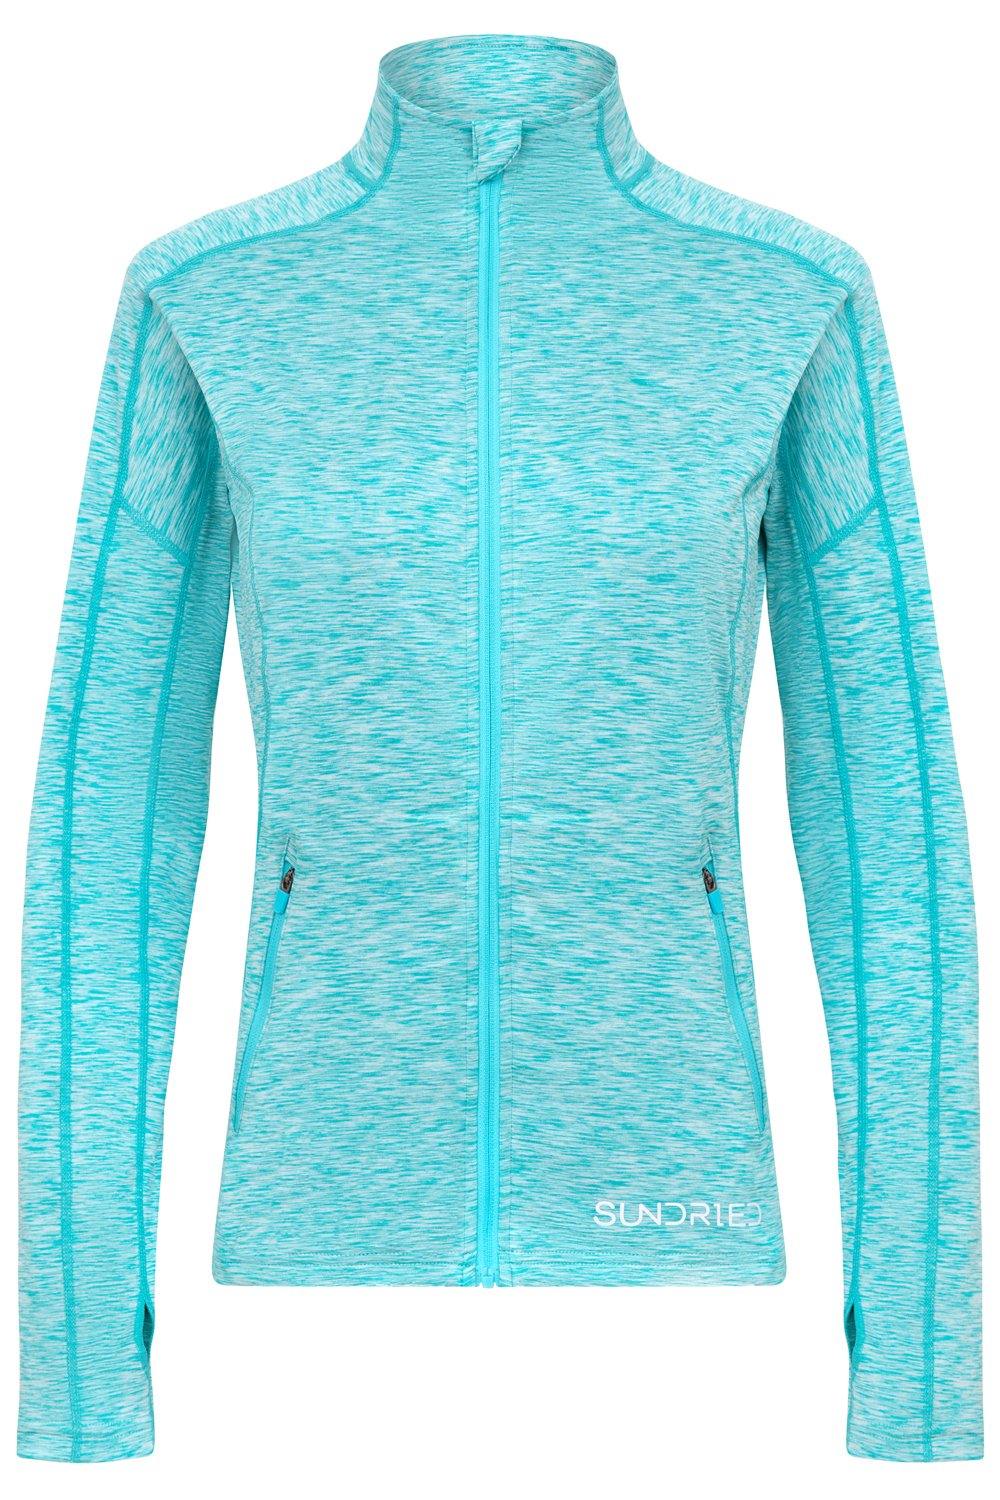 Sundried Pace Women's Long Sleeve Top Jackets XS Blue SD0153 XS Blue Activewear